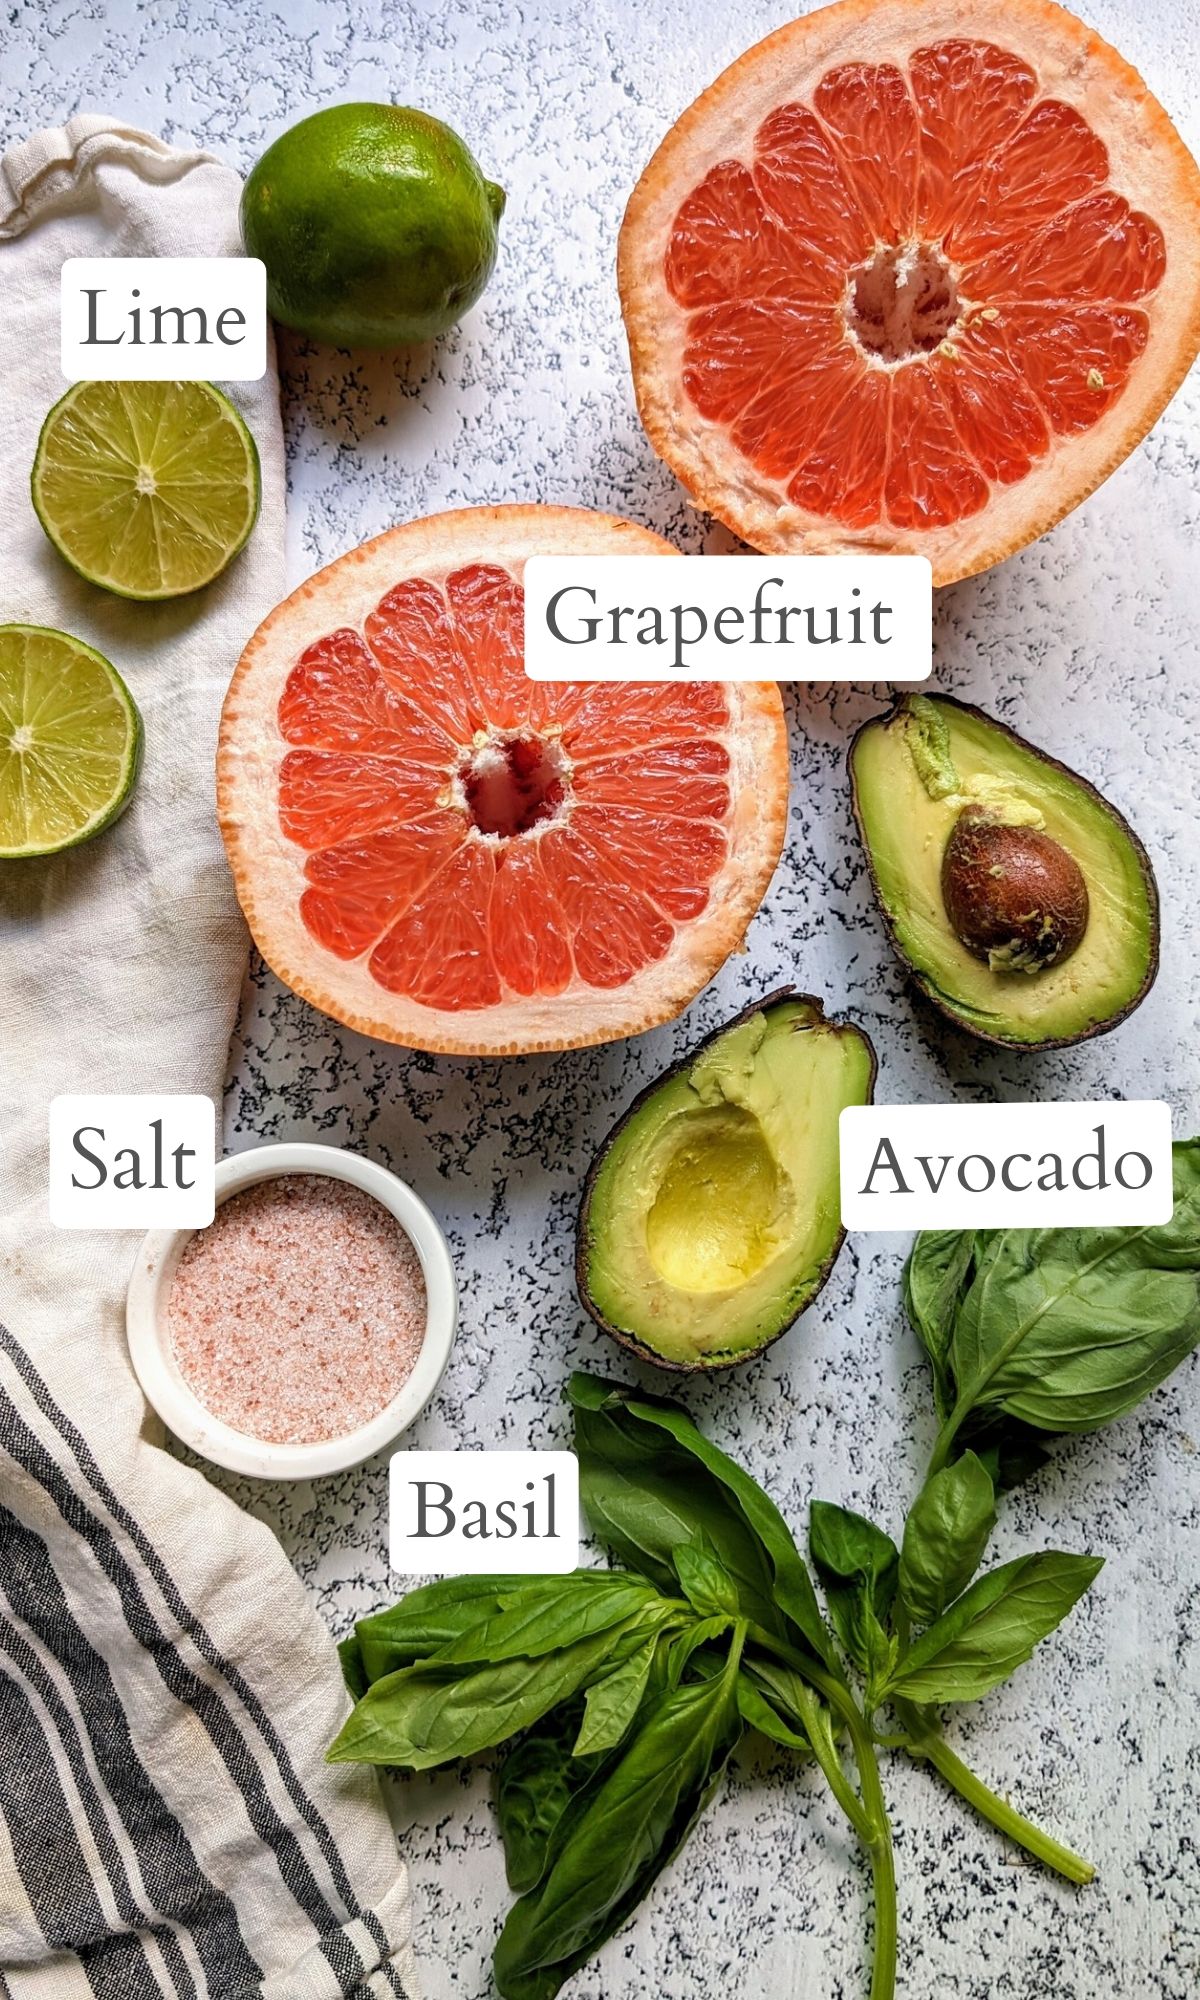 Ingredients for this salad: ruby red grapefruit, fresh avocado, limes, basil, and pink salt.